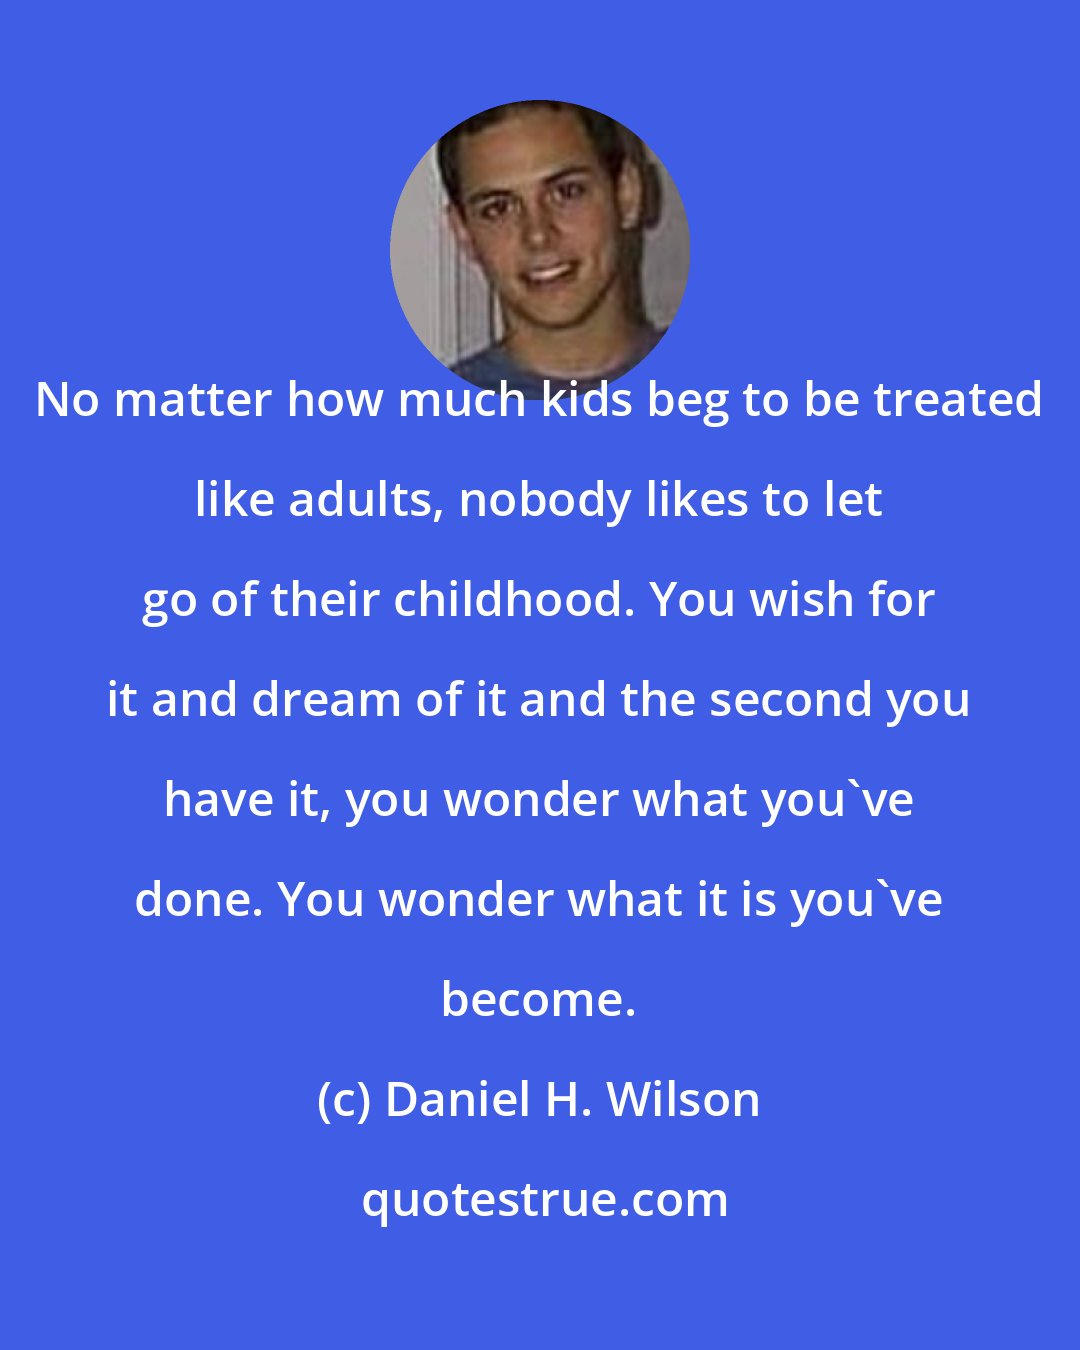 Daniel H. Wilson: No matter how much kids beg to be treated like adults, nobody likes to let go of their childhood. You wish for it and dream of it and the second you have it, you wonder what you've done. You wonder what it is you've become.